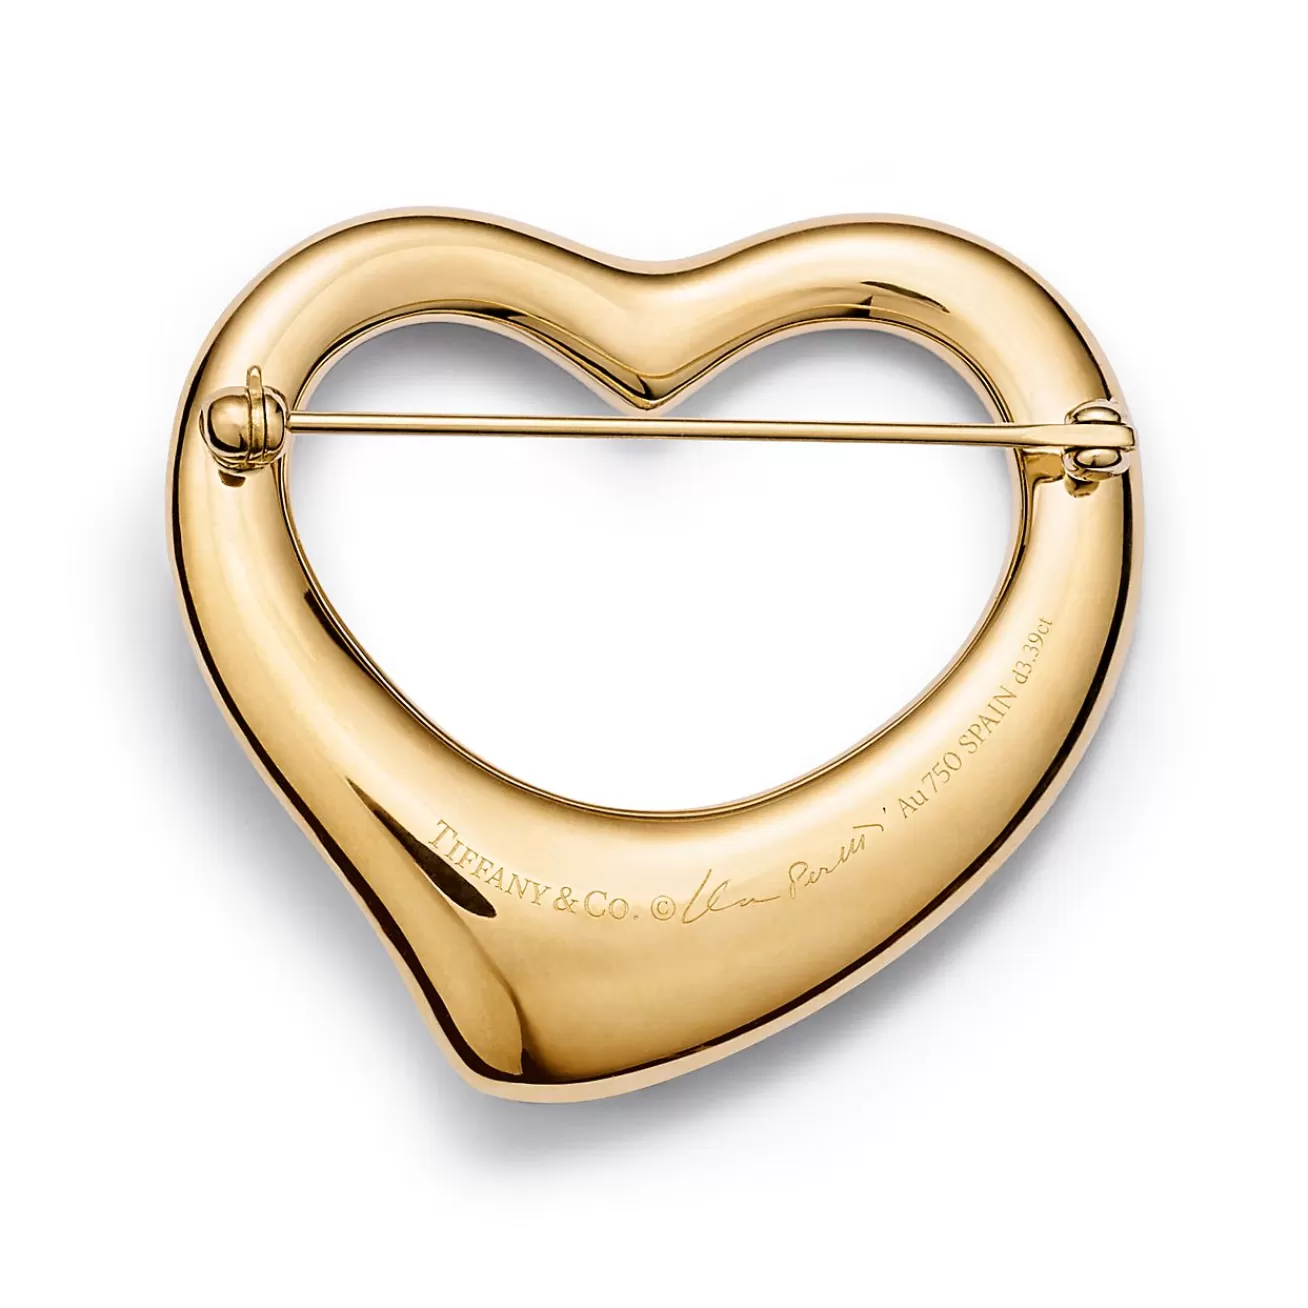 Tiffany & Co. Elsa Peretti® Open Heart Brooch in Yellow Gold with Pavé Diamonds | ^ Brooches | Gold Jewelry